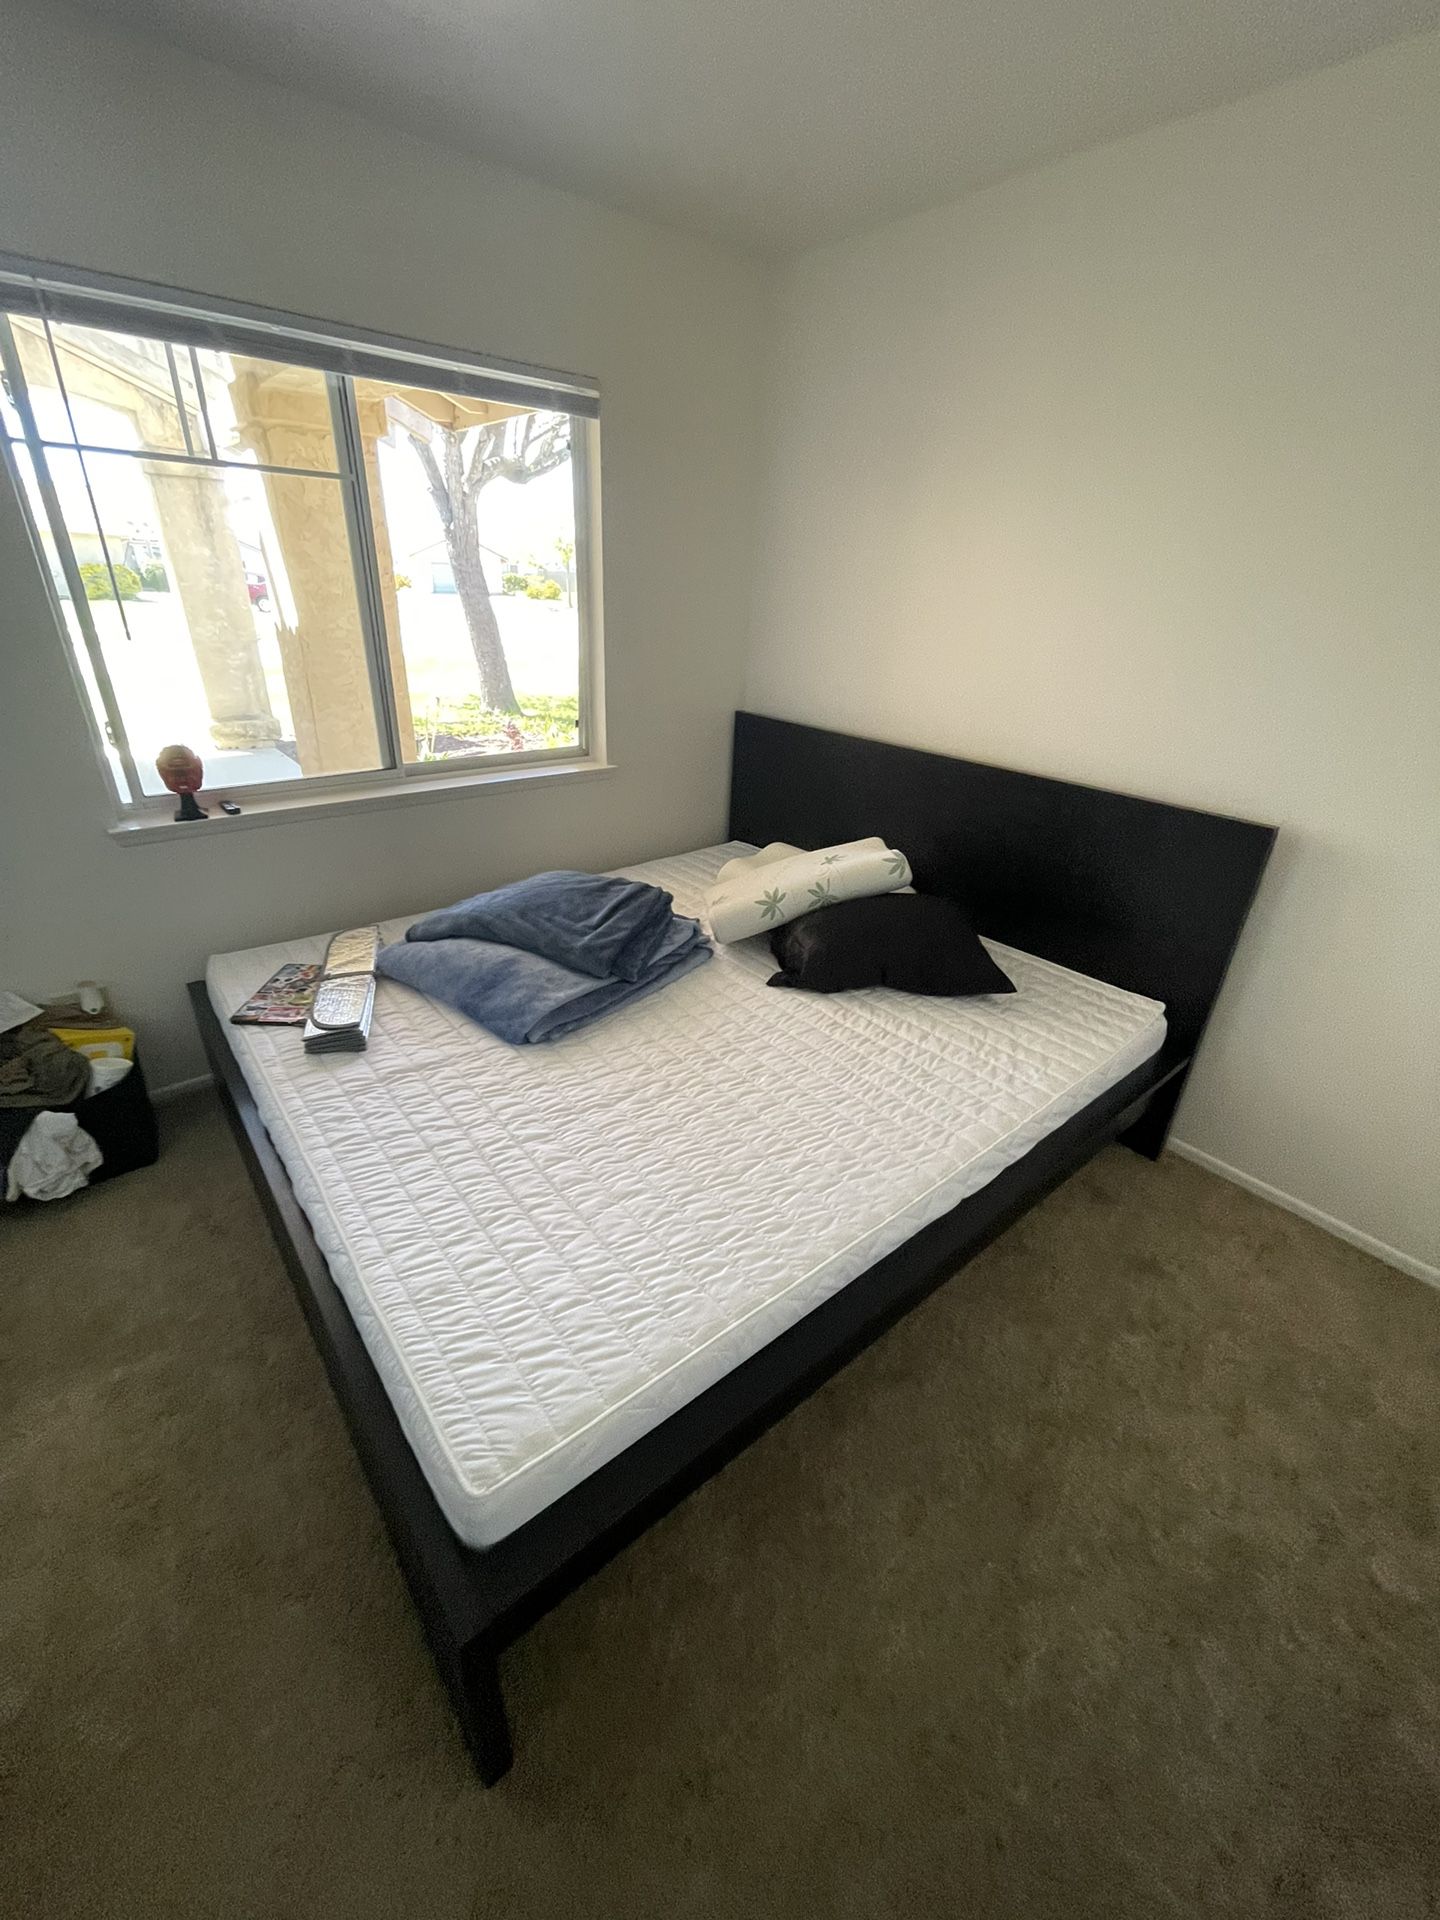 IKEA King Size Bed 